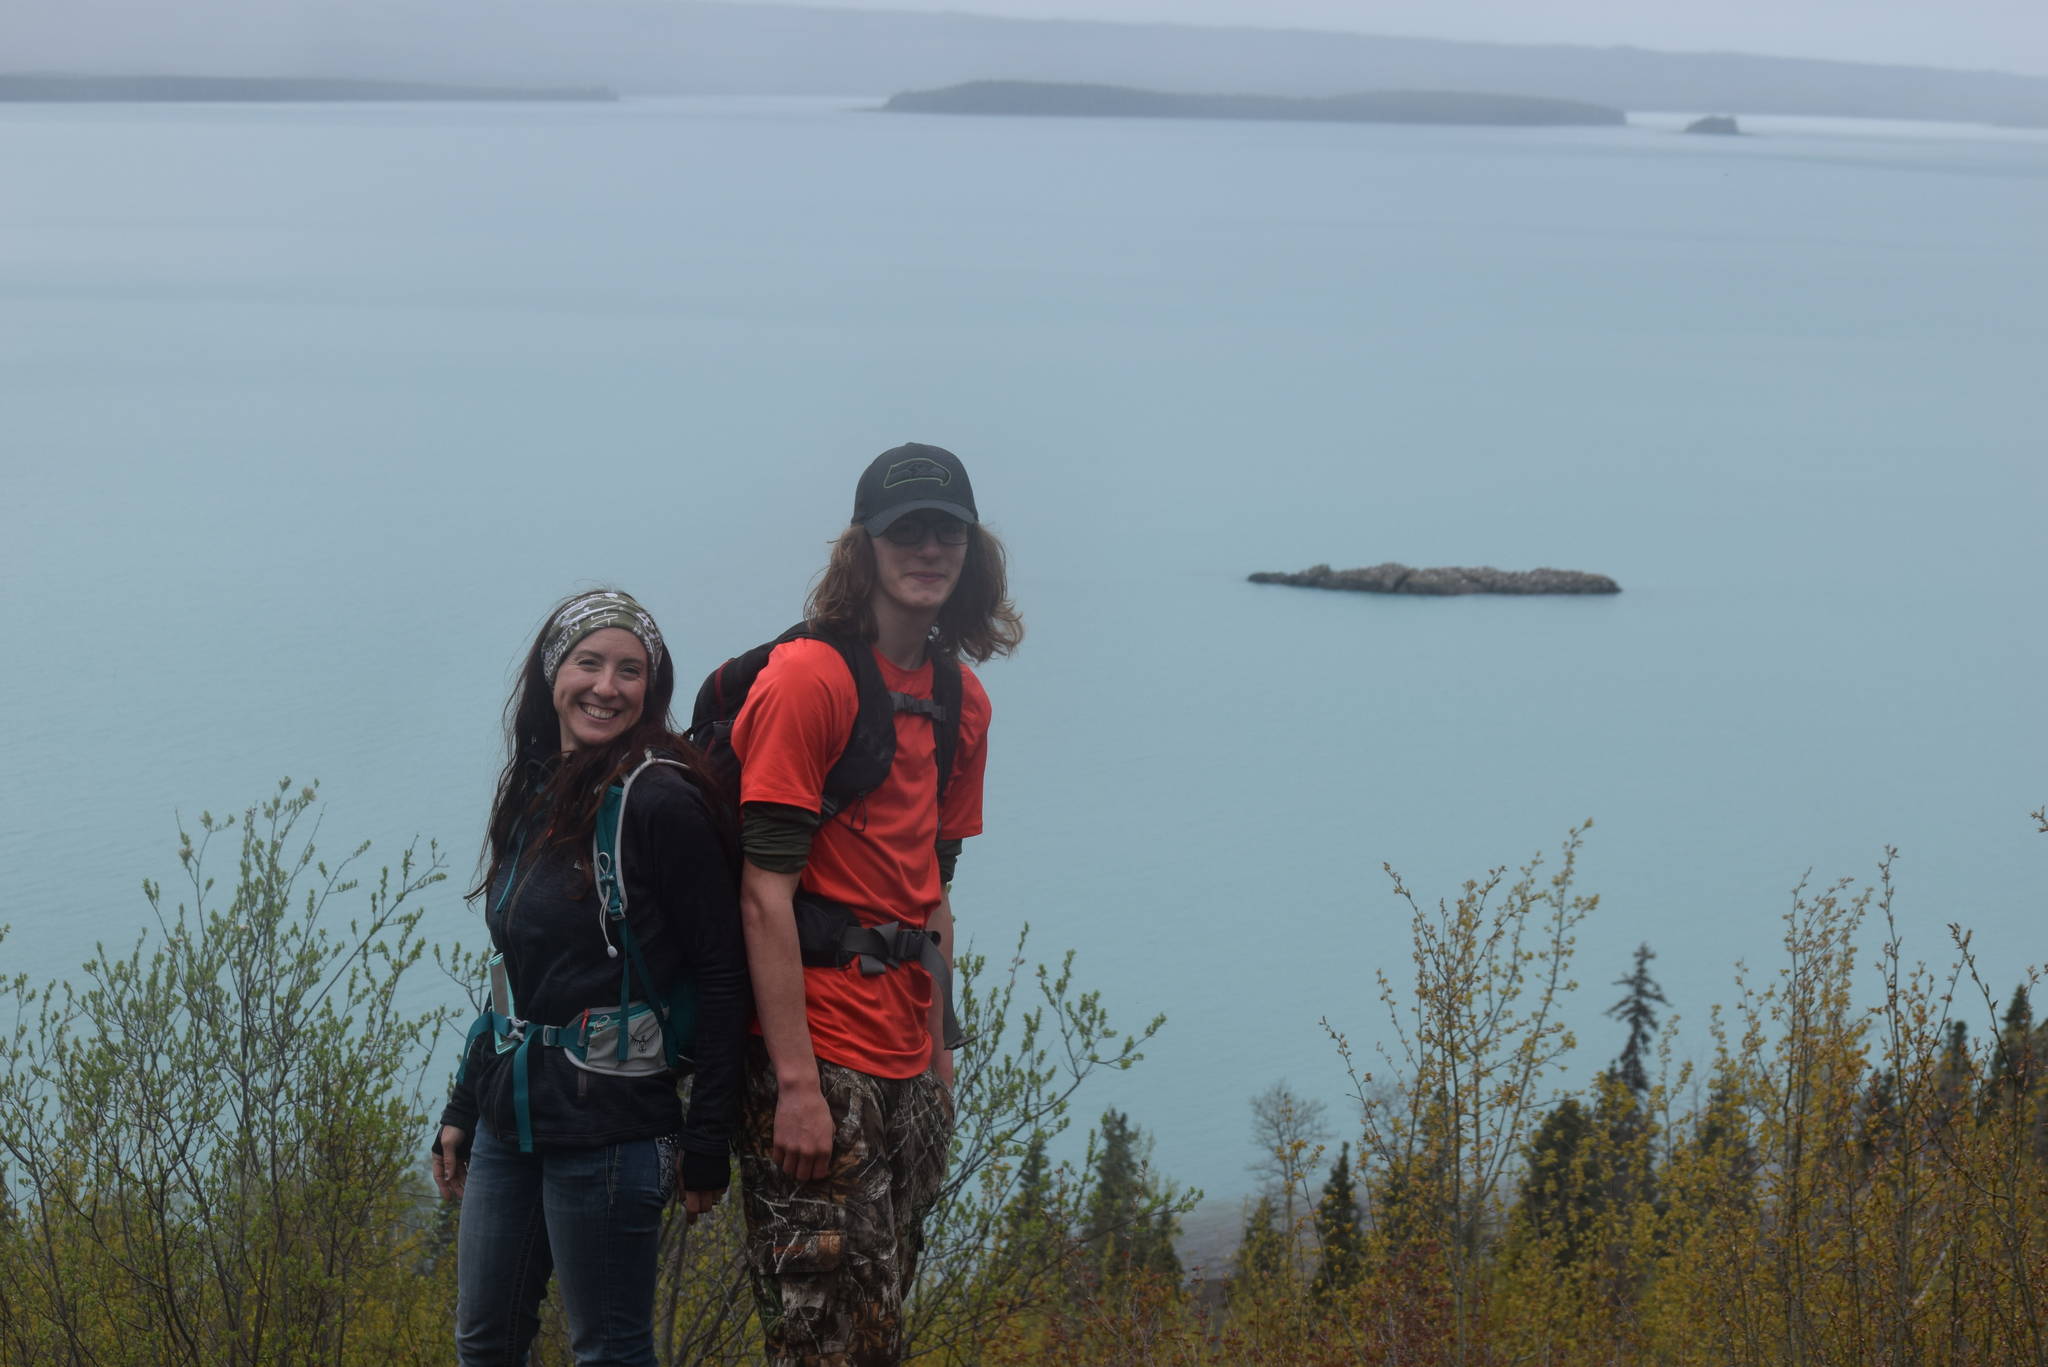 Tiffany Brand and her son pose for a photo over Skilak Lake while hiking the Vista Trail in Alaska on Saturday, May 11, 2019. (Photo by Brian Mazurek/Peninsula Clarion)